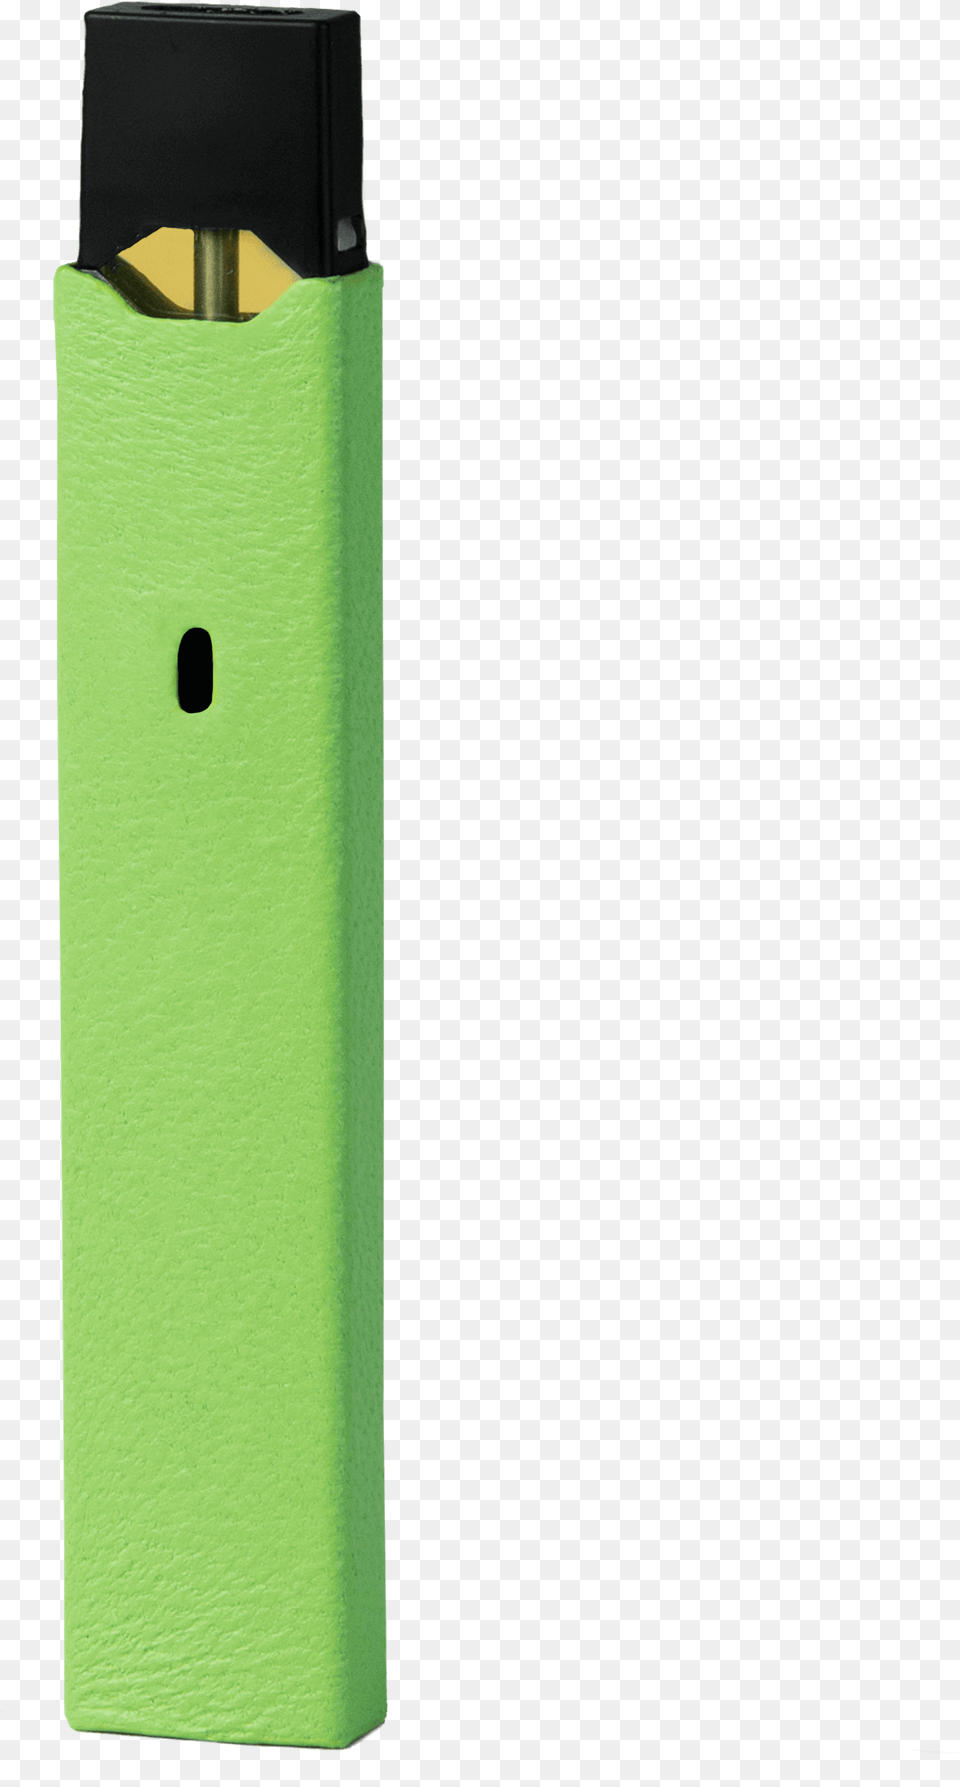 Granny Smith Green Leather Juul Sleeve With Fruit Stickers Usb Flash Drive, Lighter Png Image